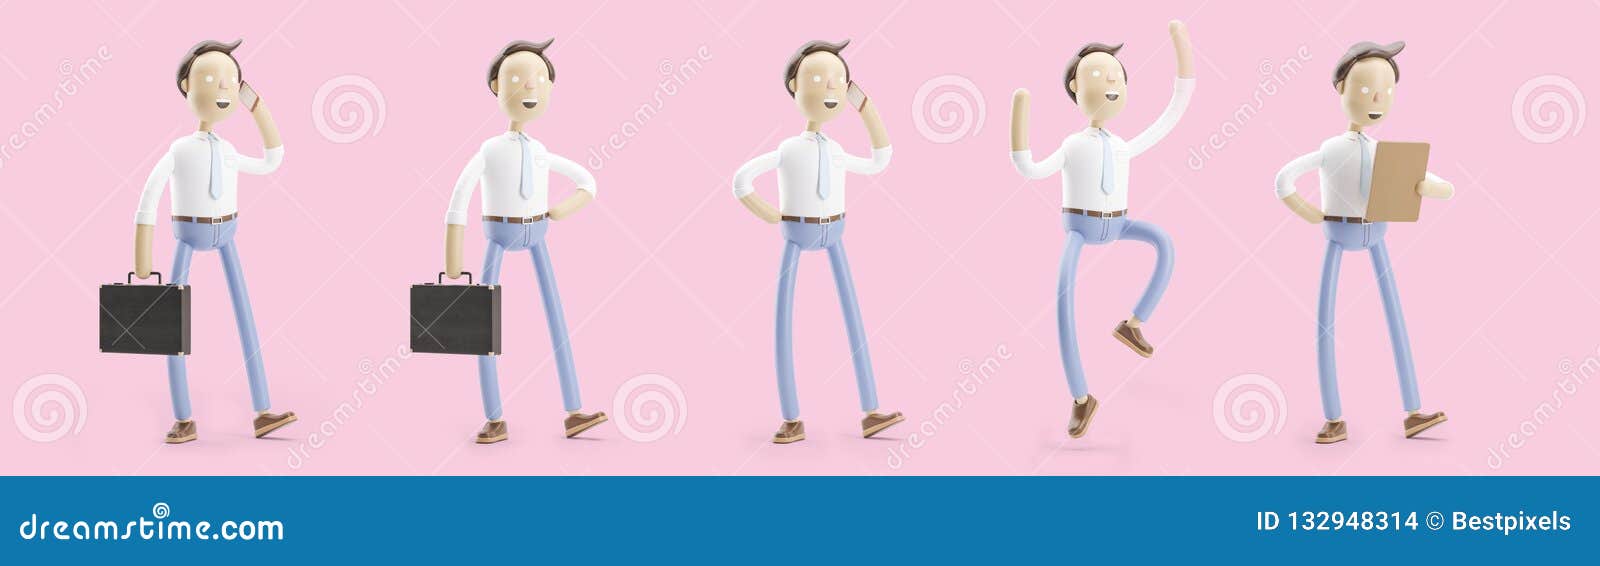 set of 3d . businessman jimmy is standing with a briefcase.